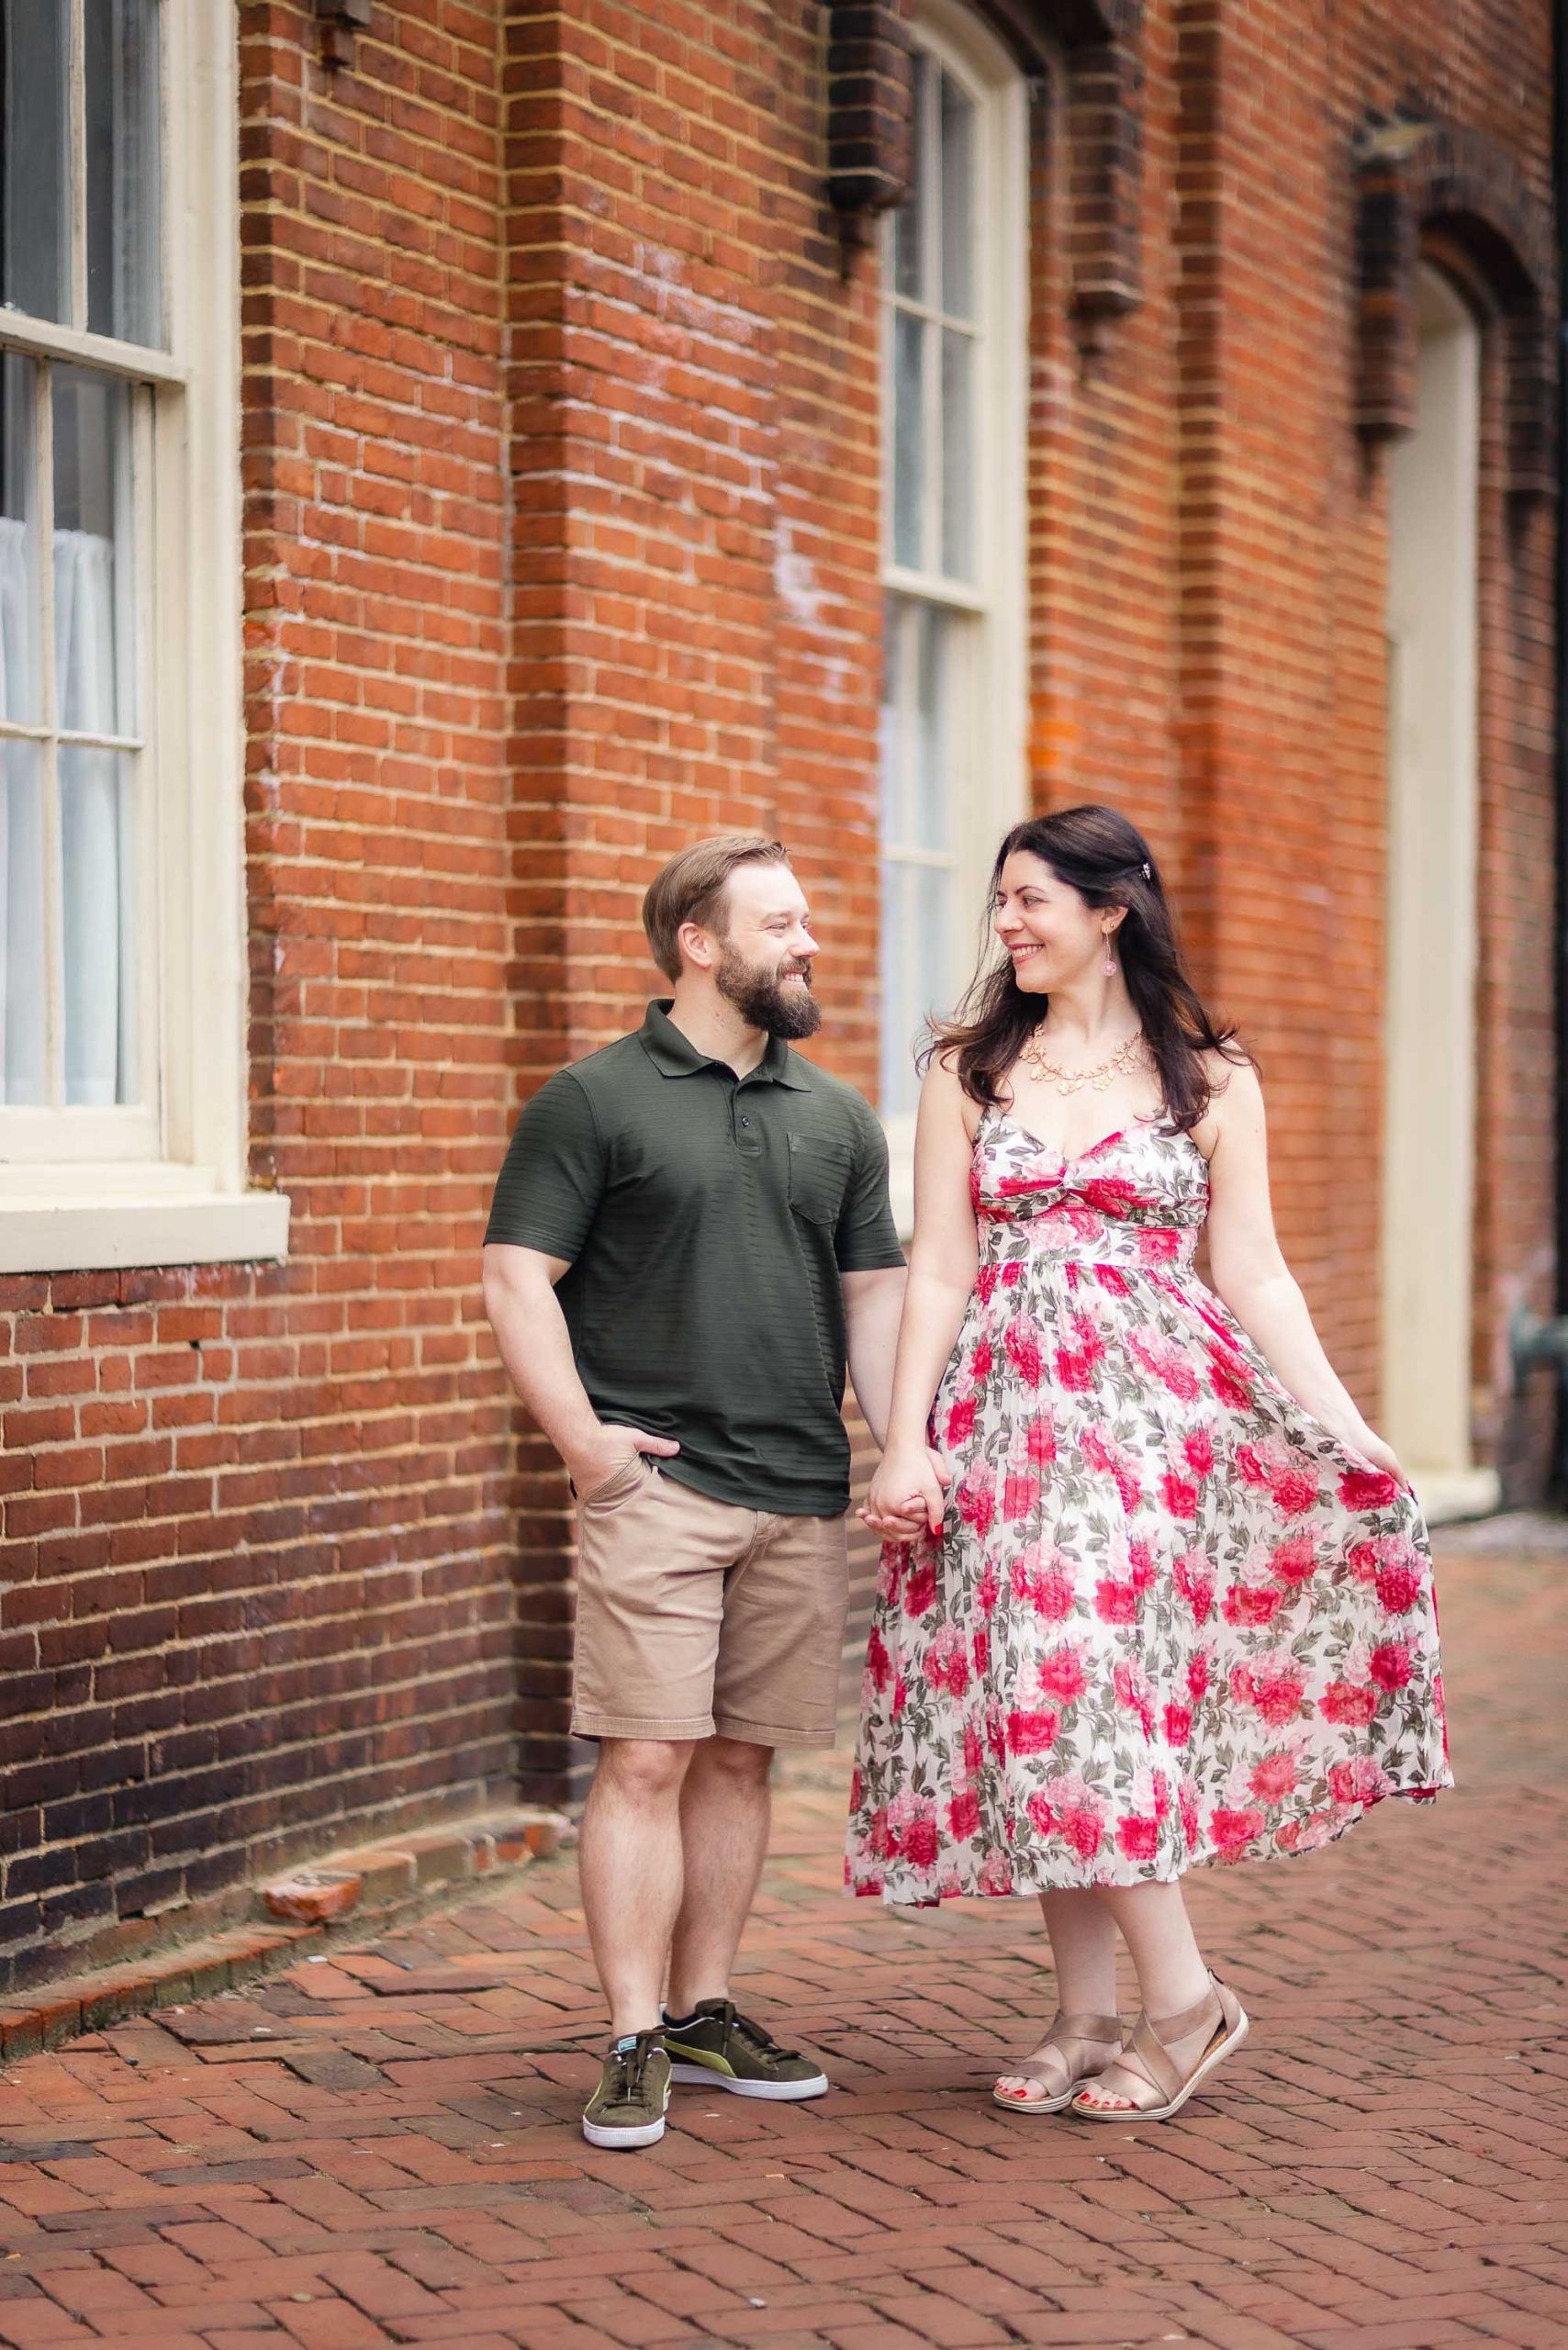 An engaged couple posing for their engagement photos in downtown Annapolis, in front of a brick building.